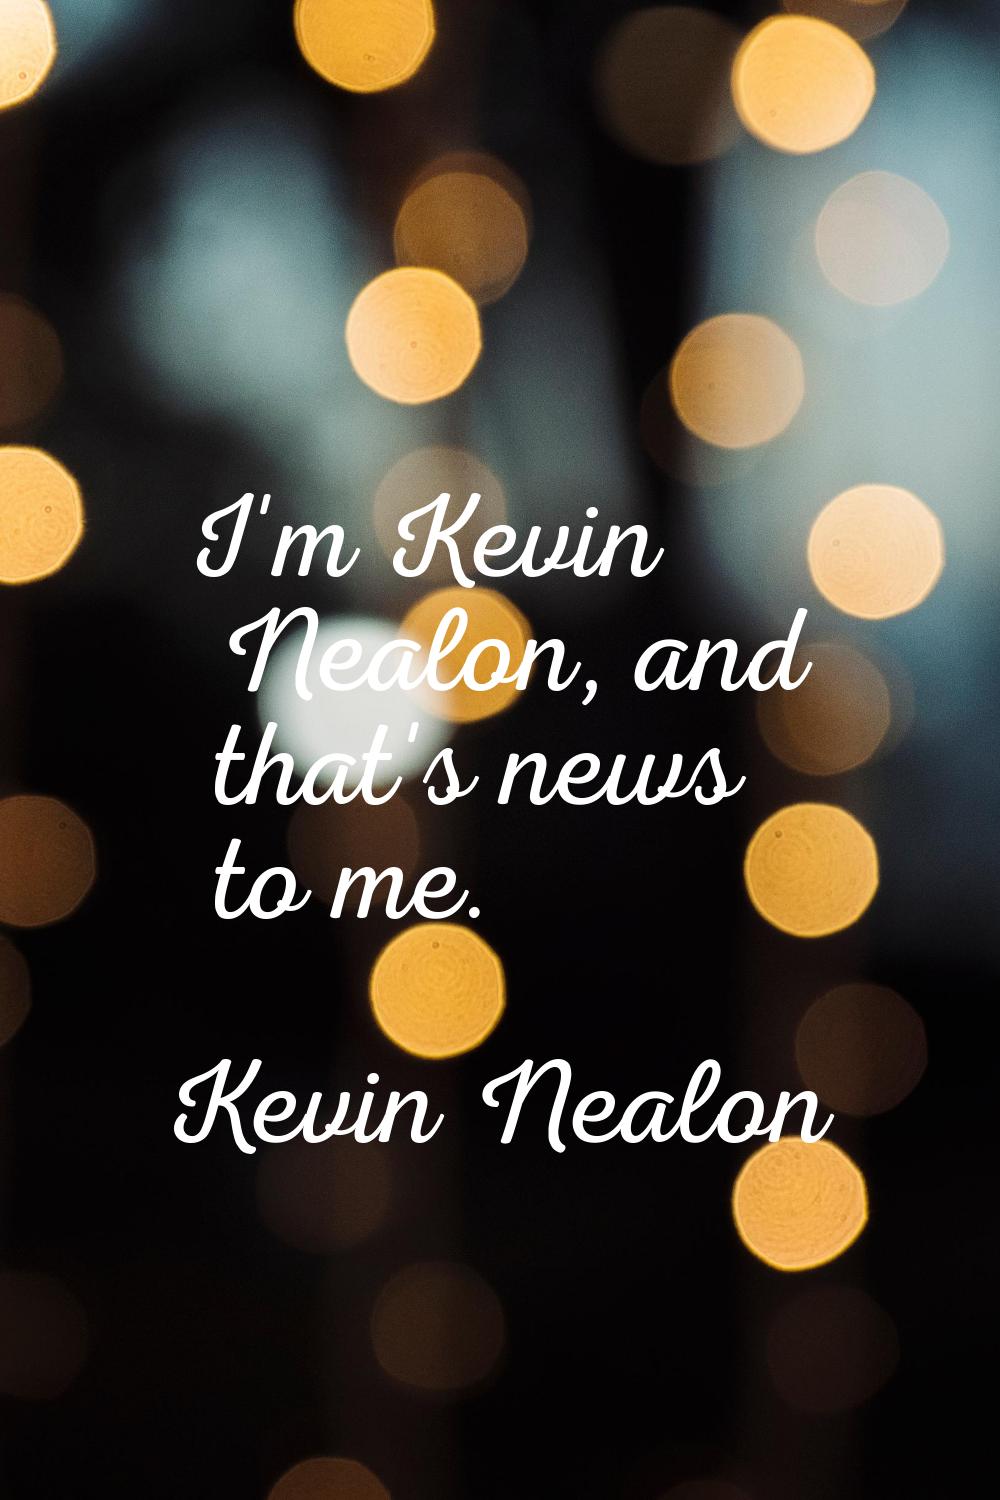 I'm Kevin Nealon, and that's news to me.